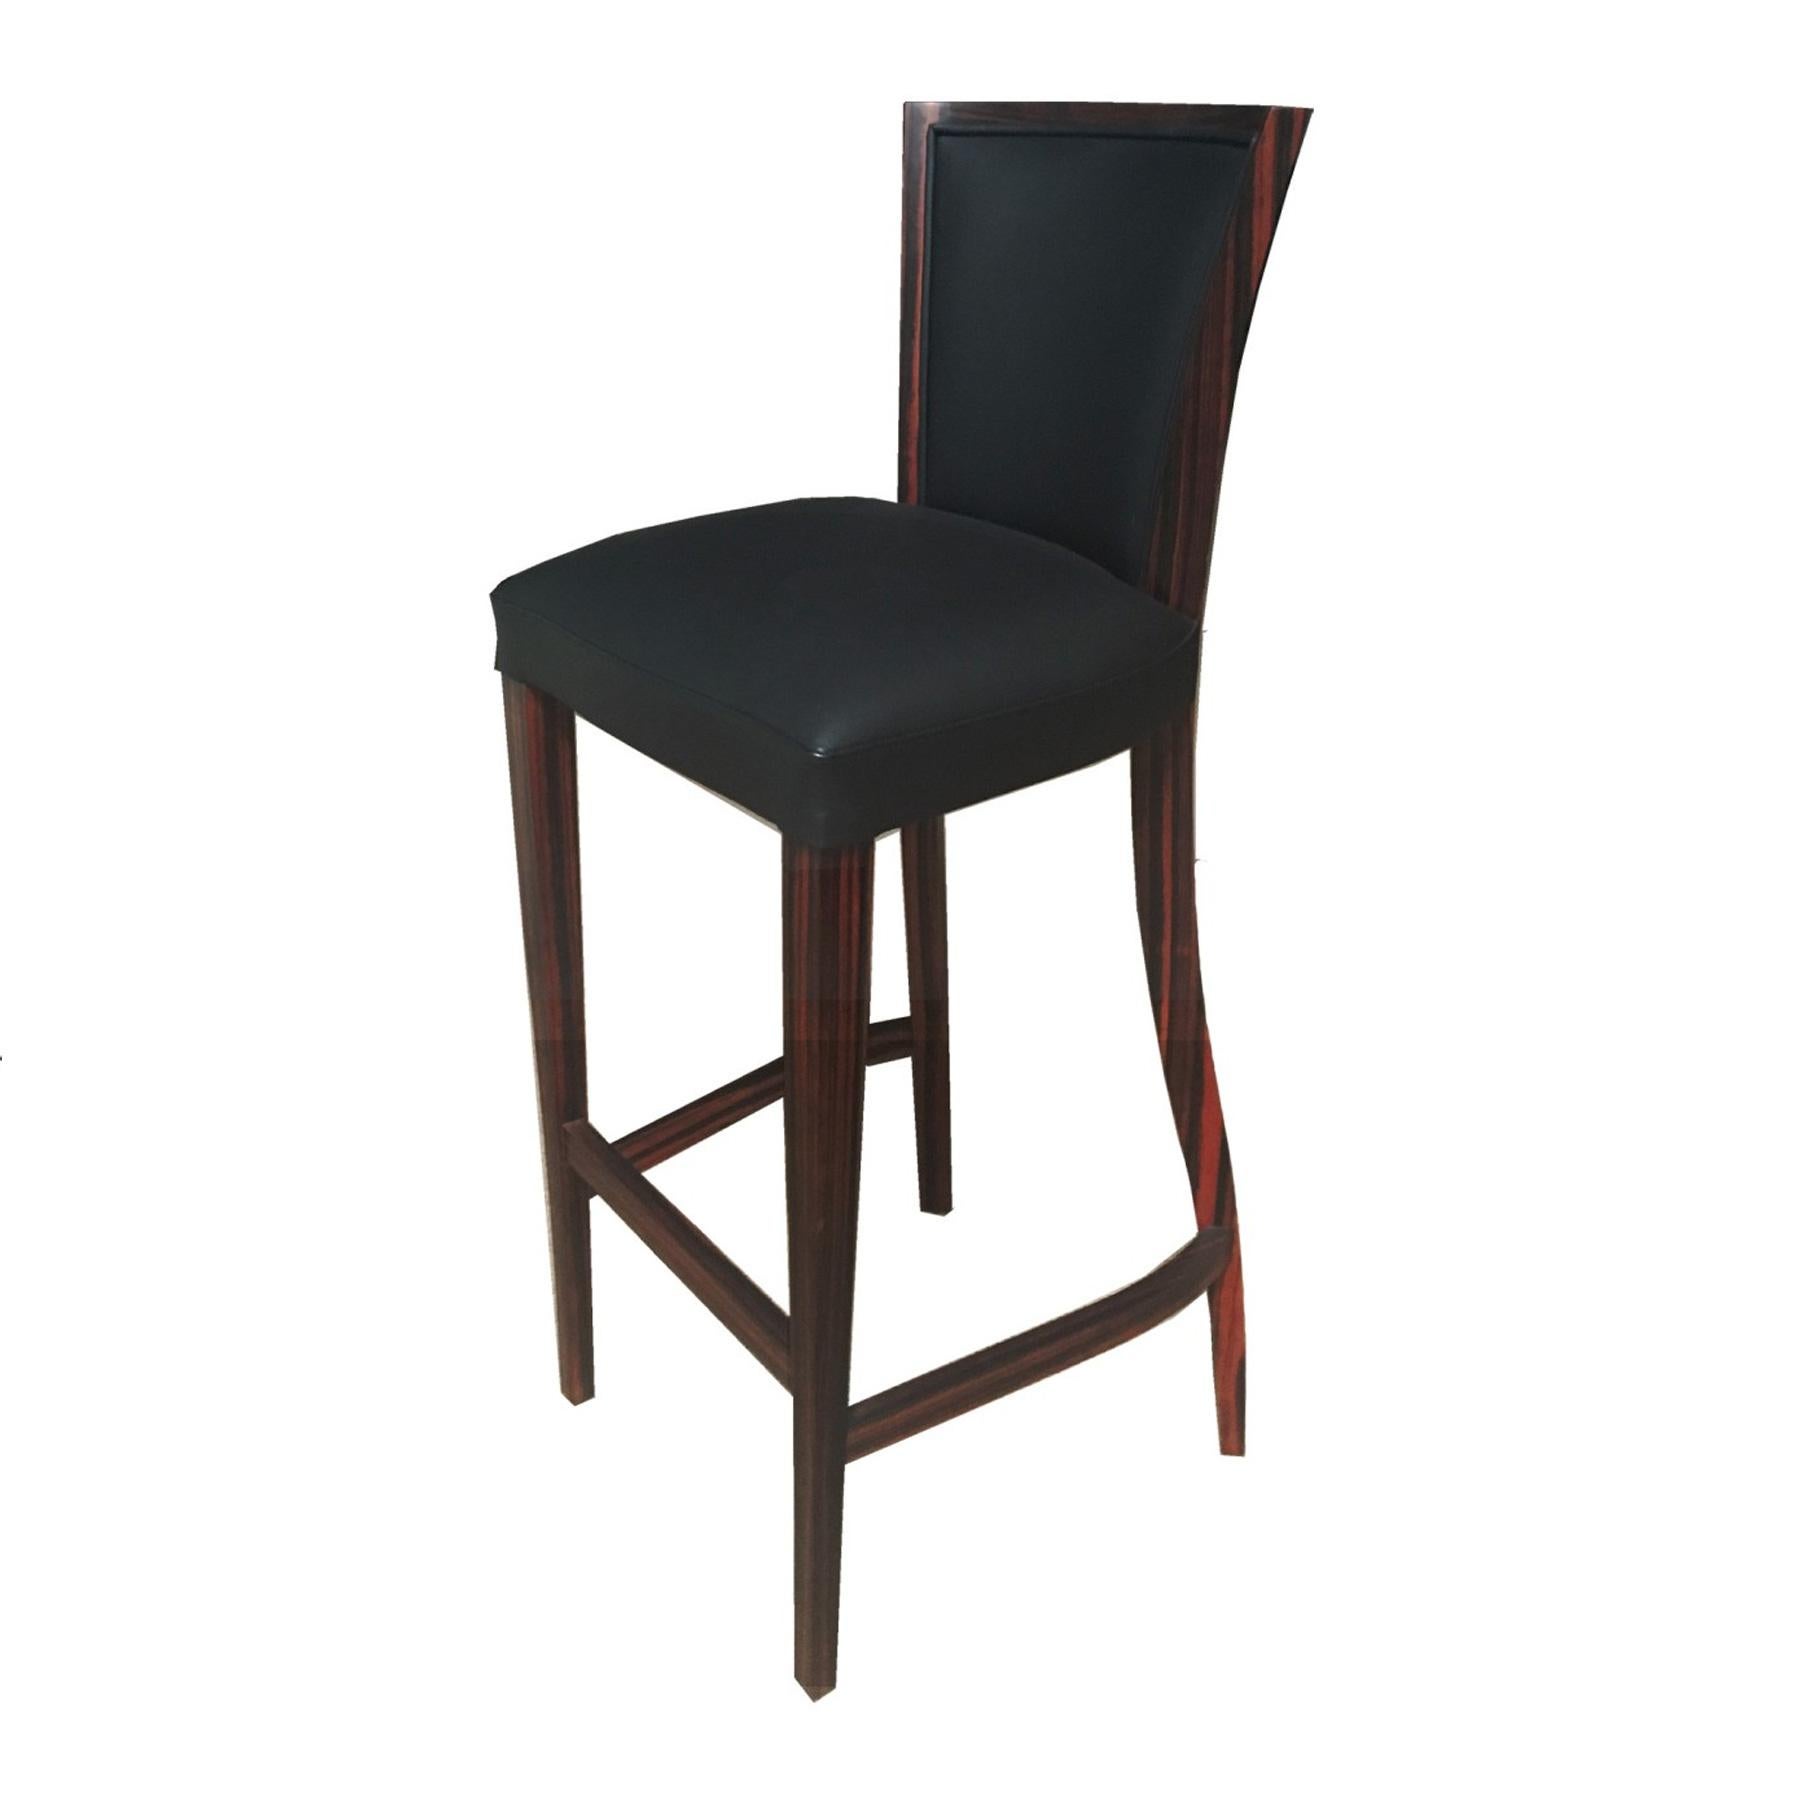 Luxury Art Deco Leather Bar Stool with Wood Frame for Hospitality For Sale